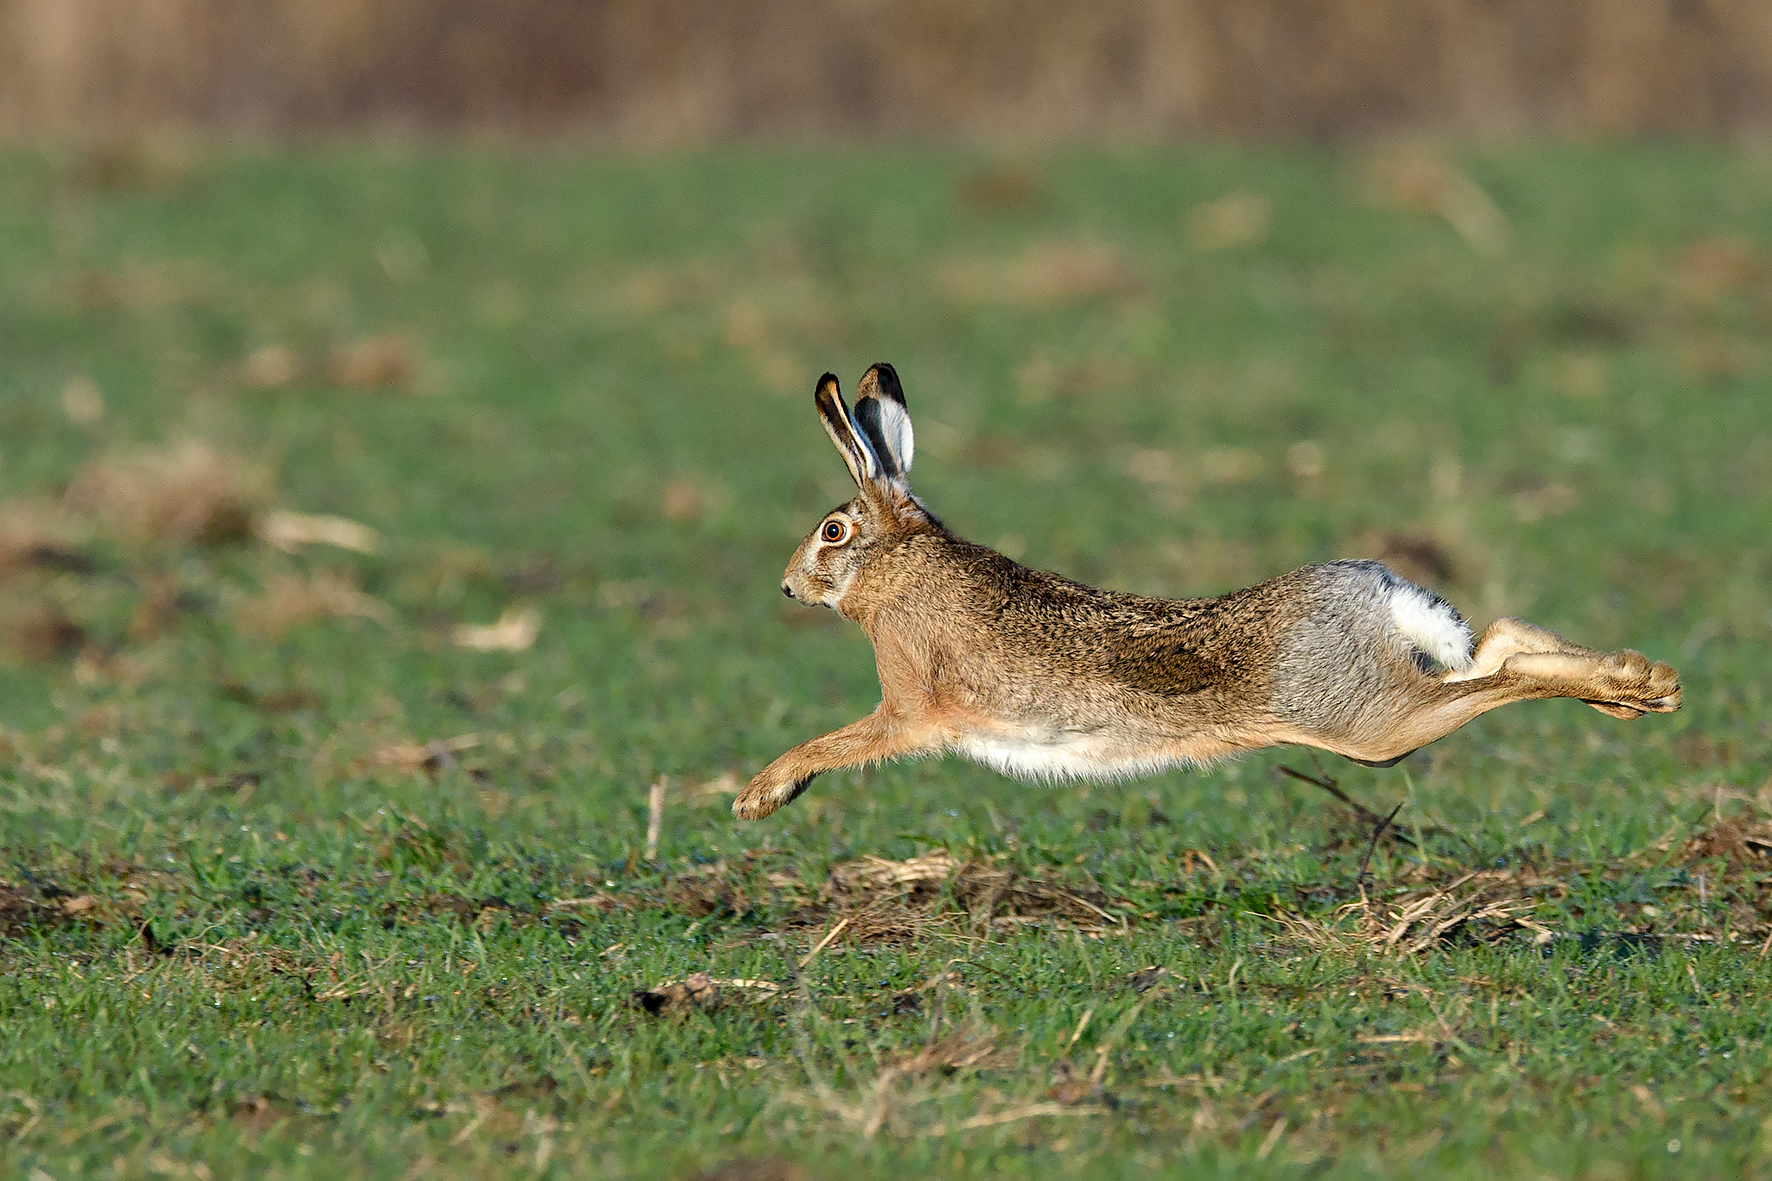 Female hare in the race...